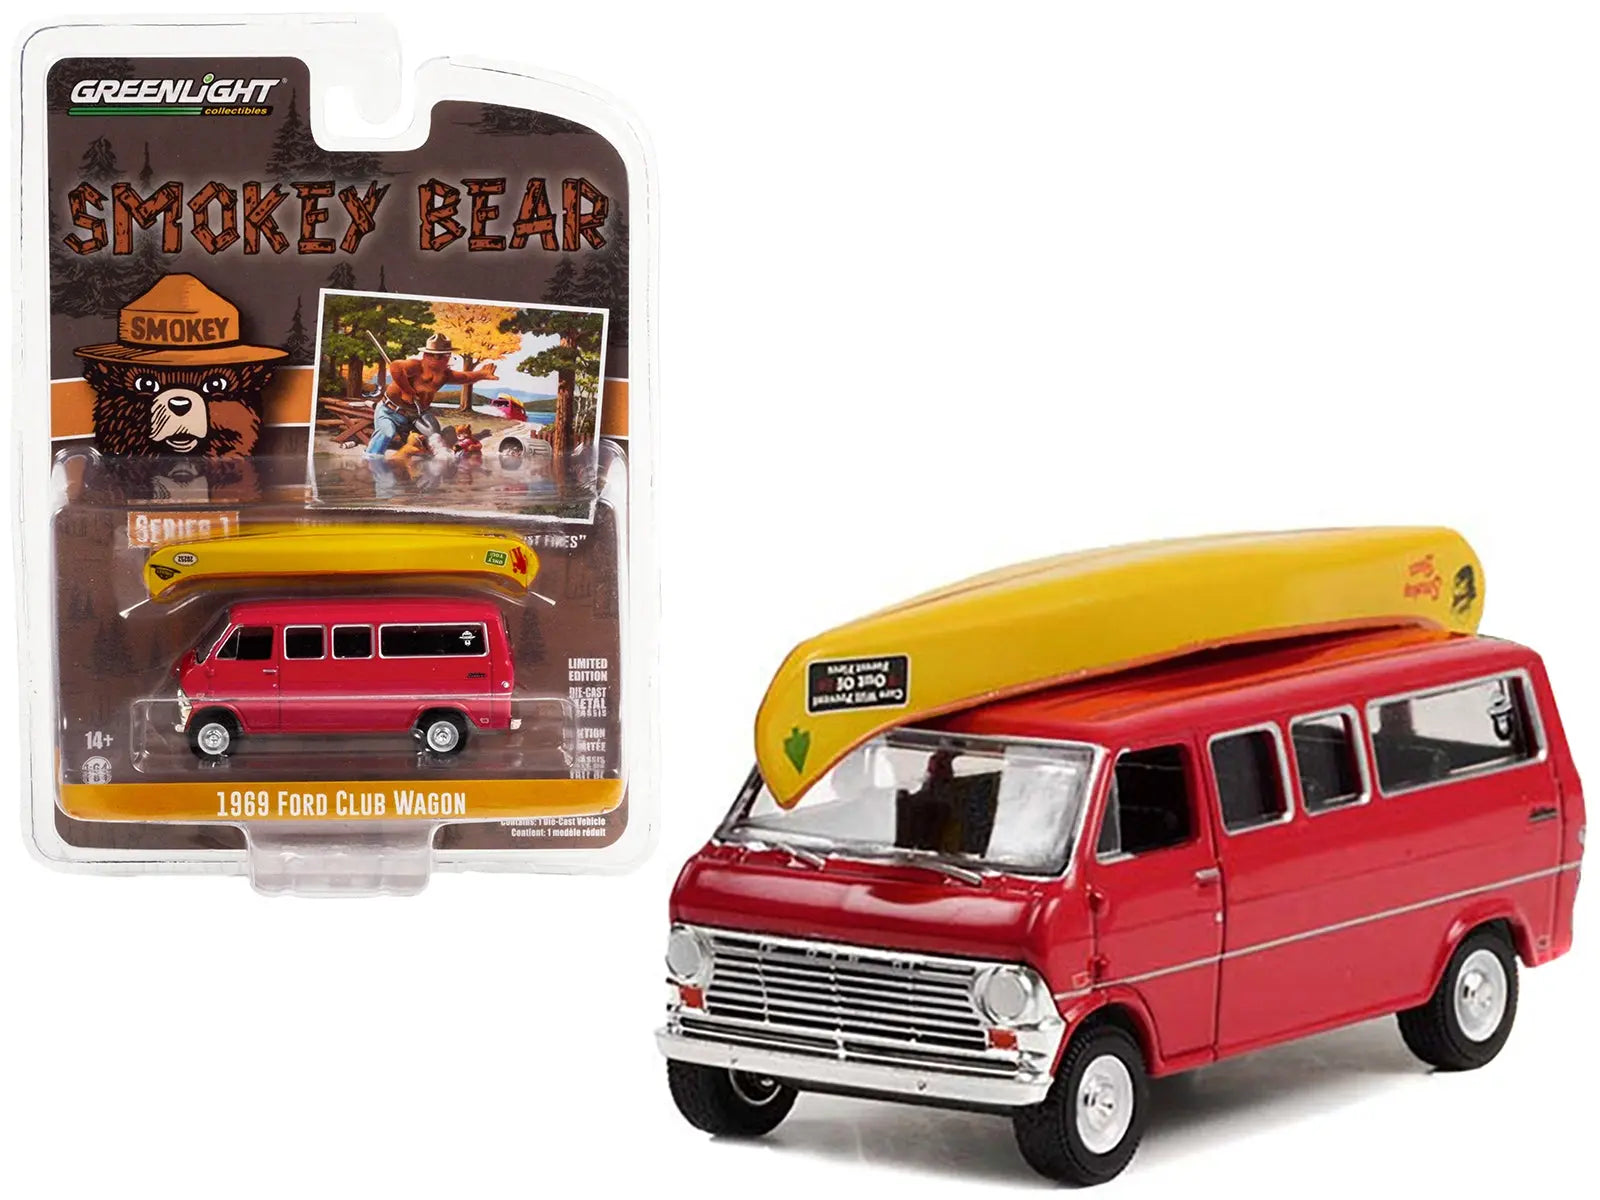 1969 Ford Club Wagon Van Red with Canoe on Roof "Care Will Prevent 9 Out Of 10 Forest Fires!" "Smokey Bear" Series 1 1/64 Diecast Model Car by Greenlight Greenlight